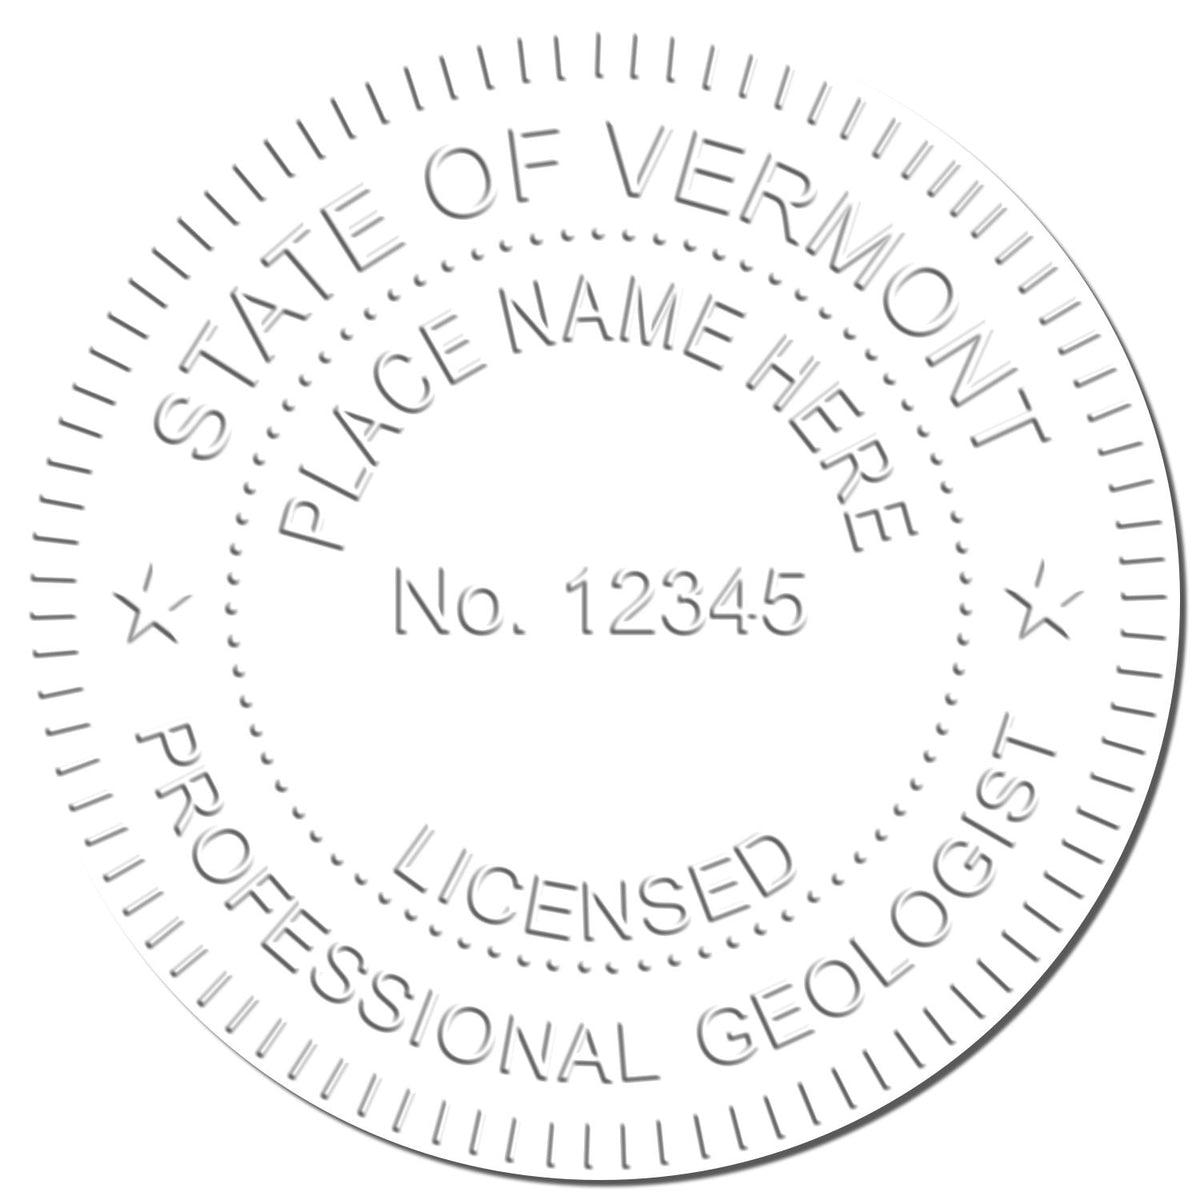 A photograph of the Hybrid Vermont Geologist Seal stamp impression reveals a vivid, professional image of the on paper.